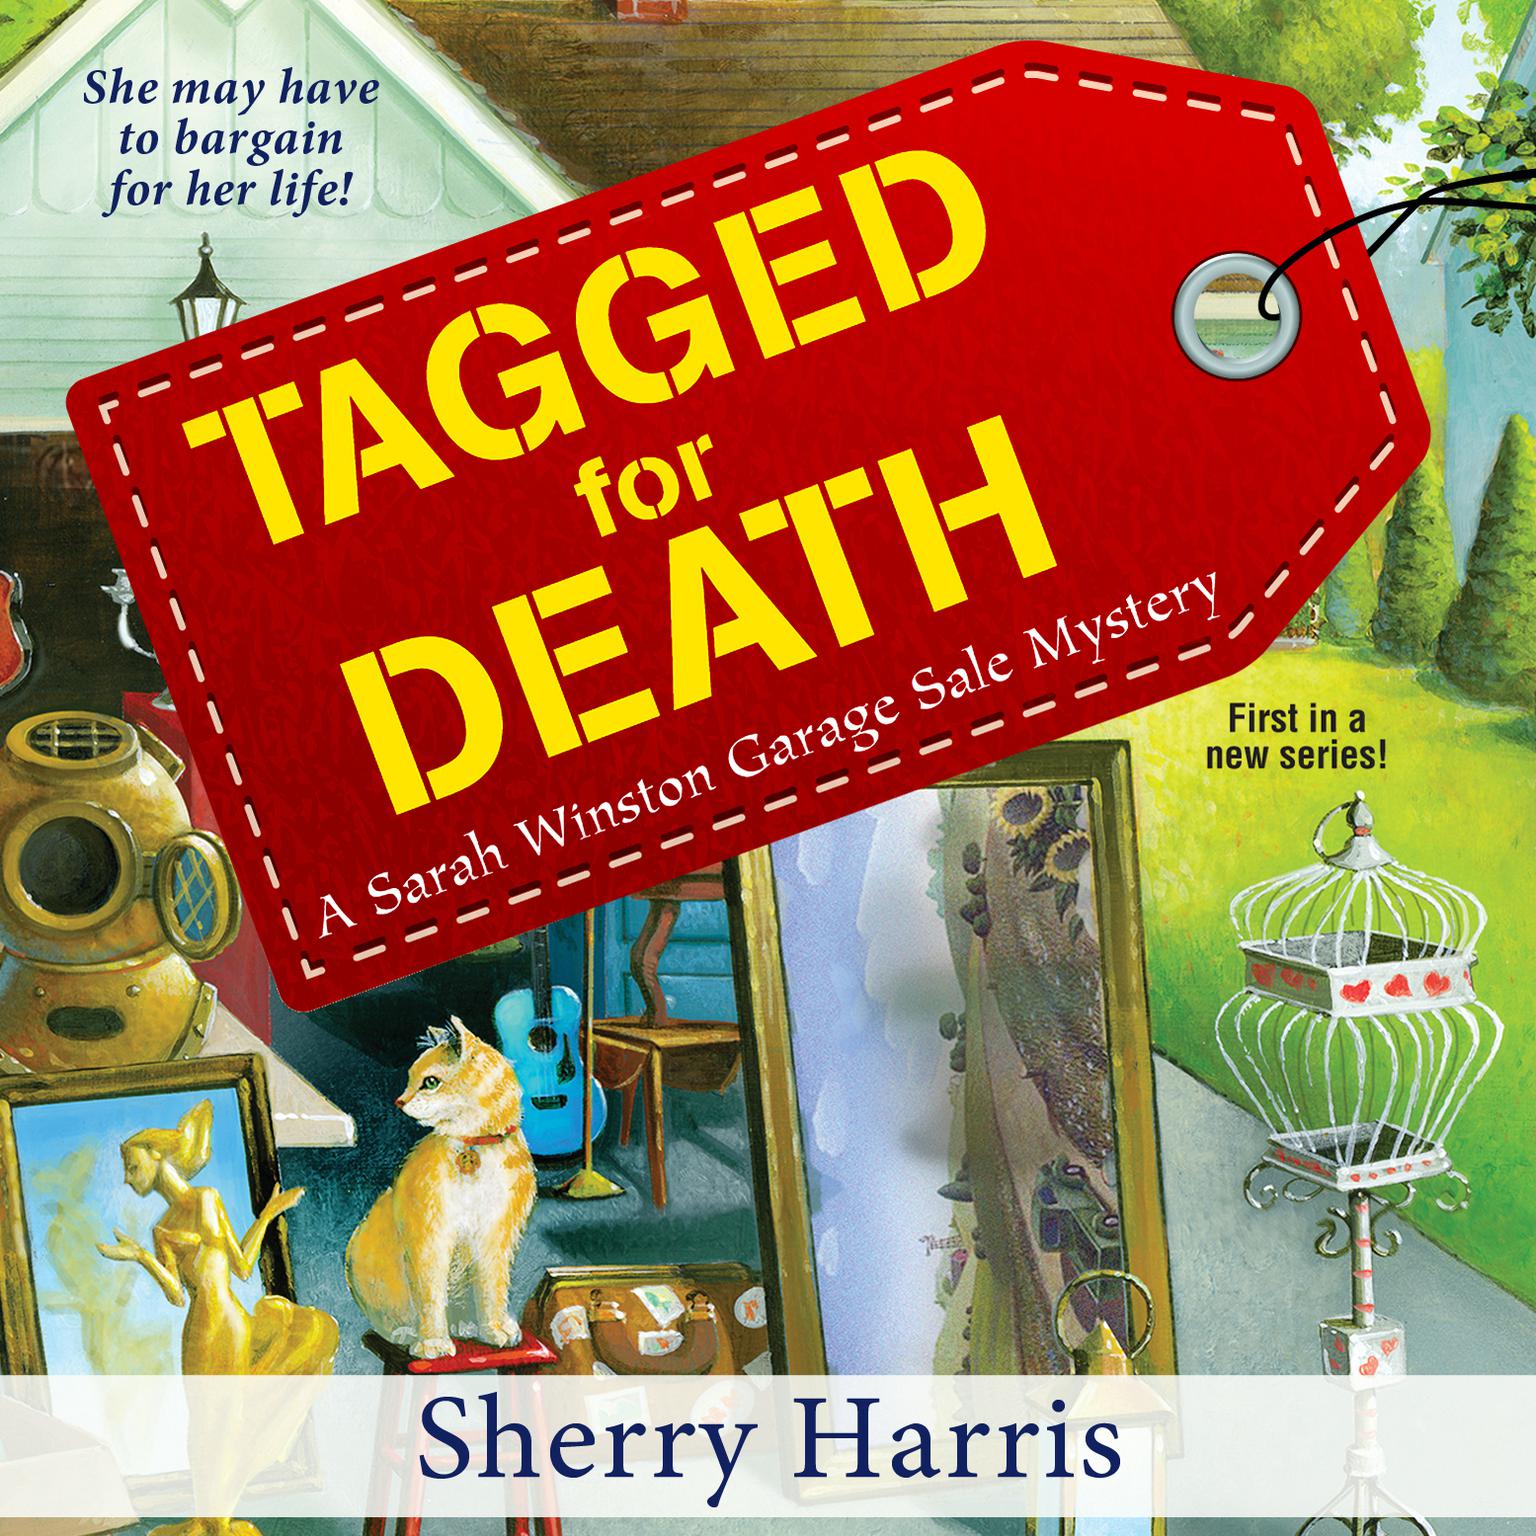 Tagged for Death Audiobook, by Sherry Harris